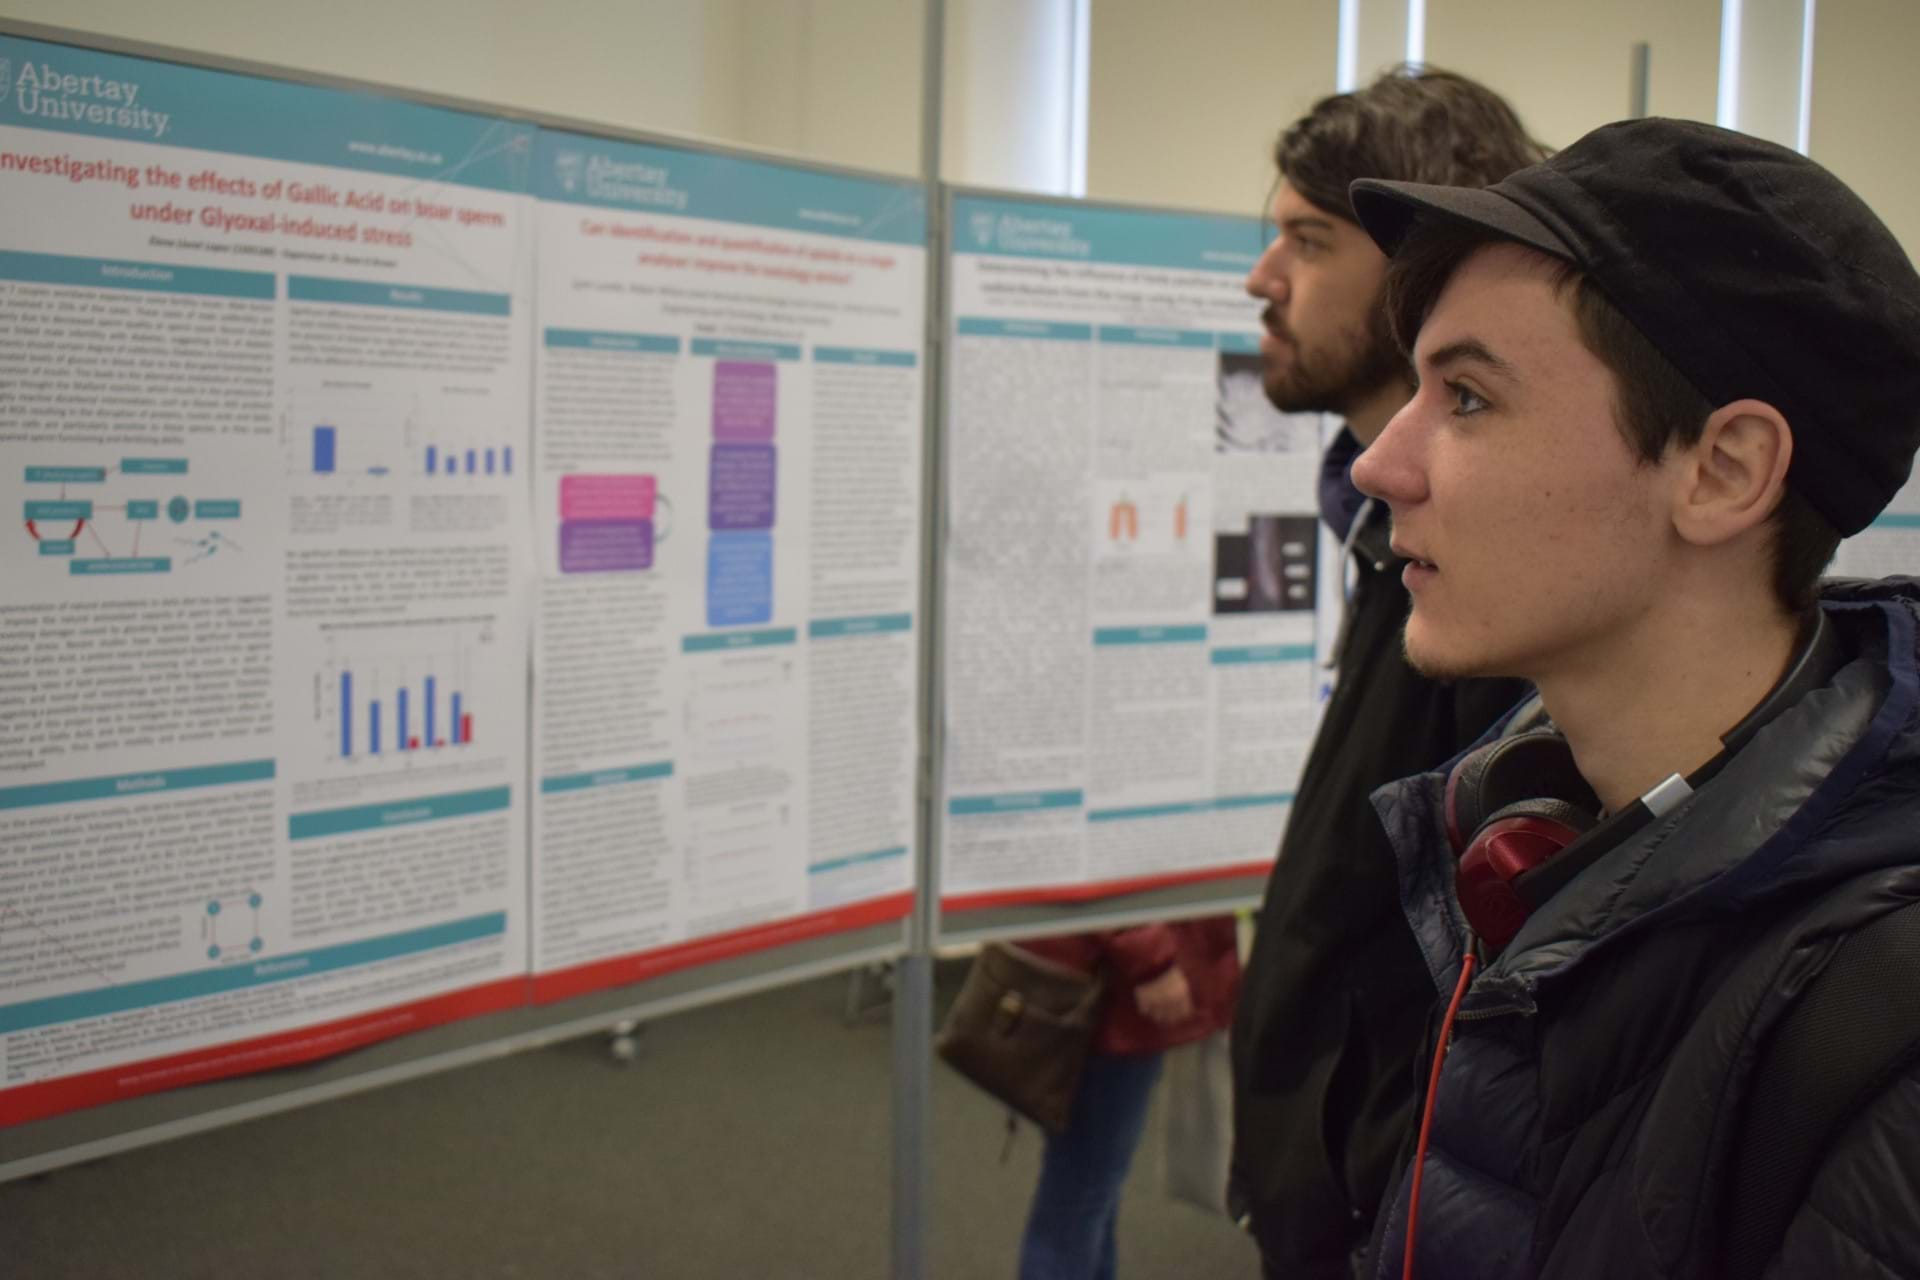 People looking at posters at the Science Degree Day